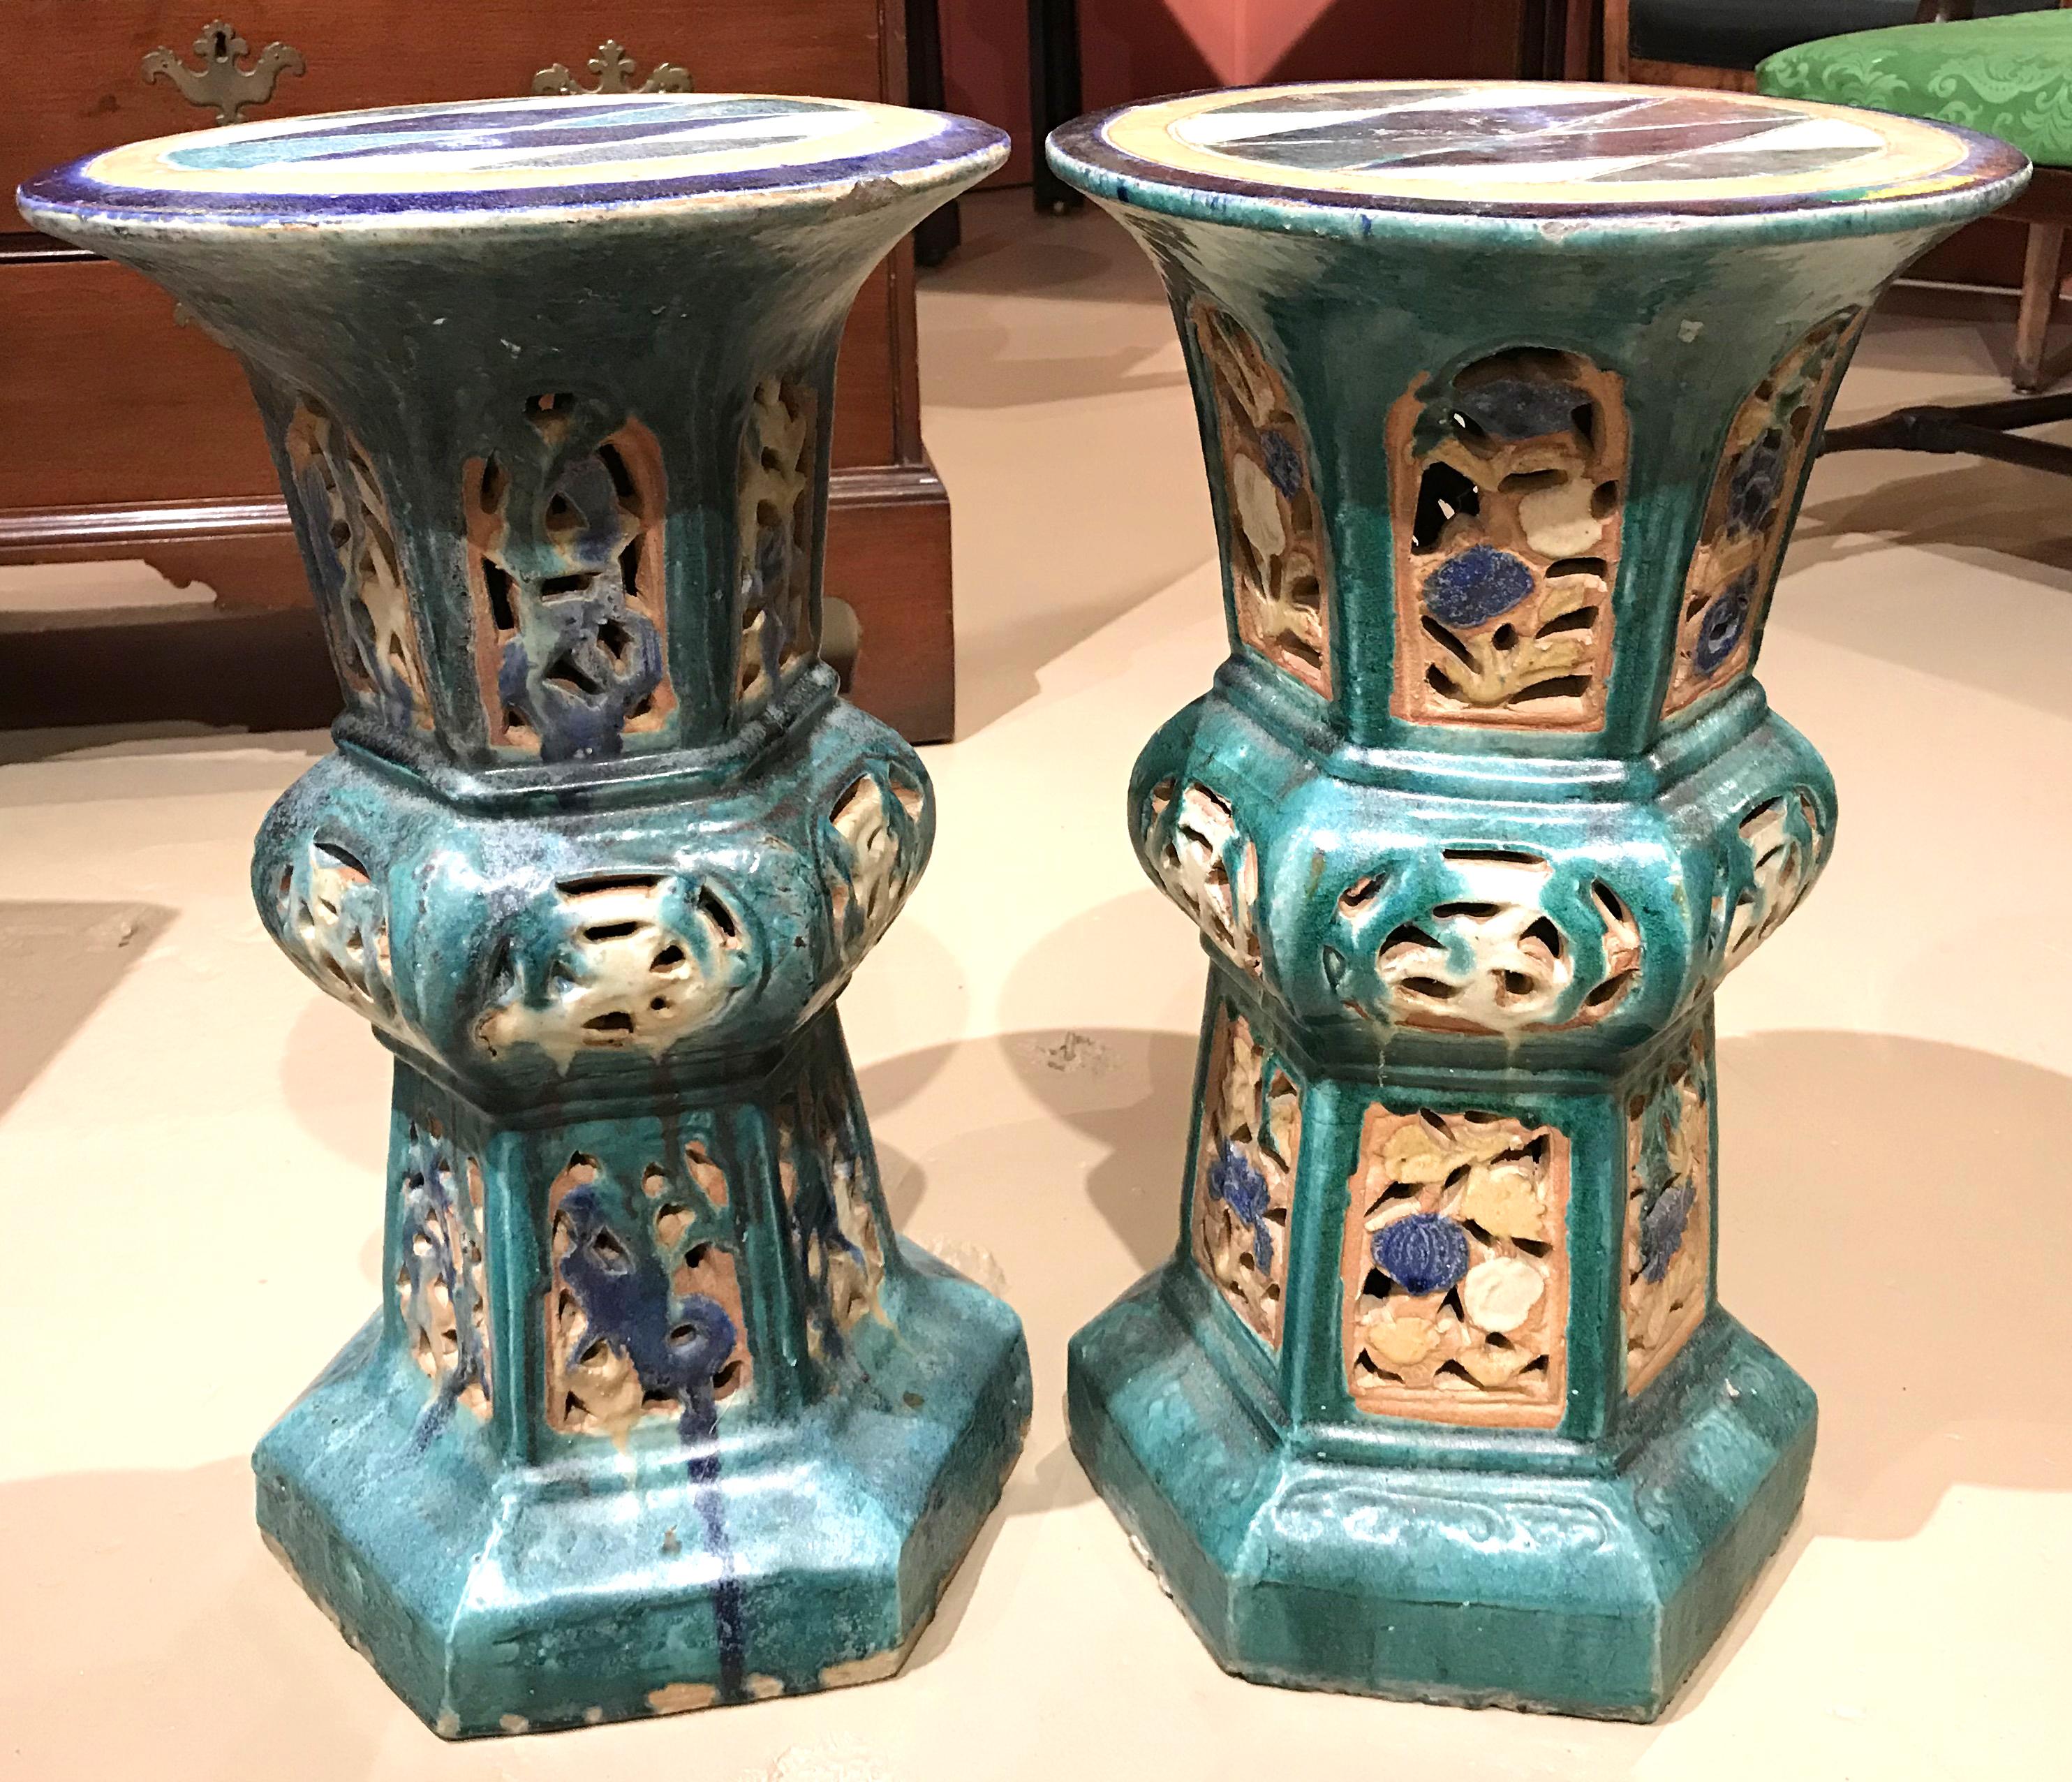 A fine pair of polychrome ceramic reticulated garden pedestals or stands with hexagonal bases, 19th century Chinese, in very good overall condition, with minor edge losses, and expected wear from age and use. Dimensions: 21 in height x 12 in